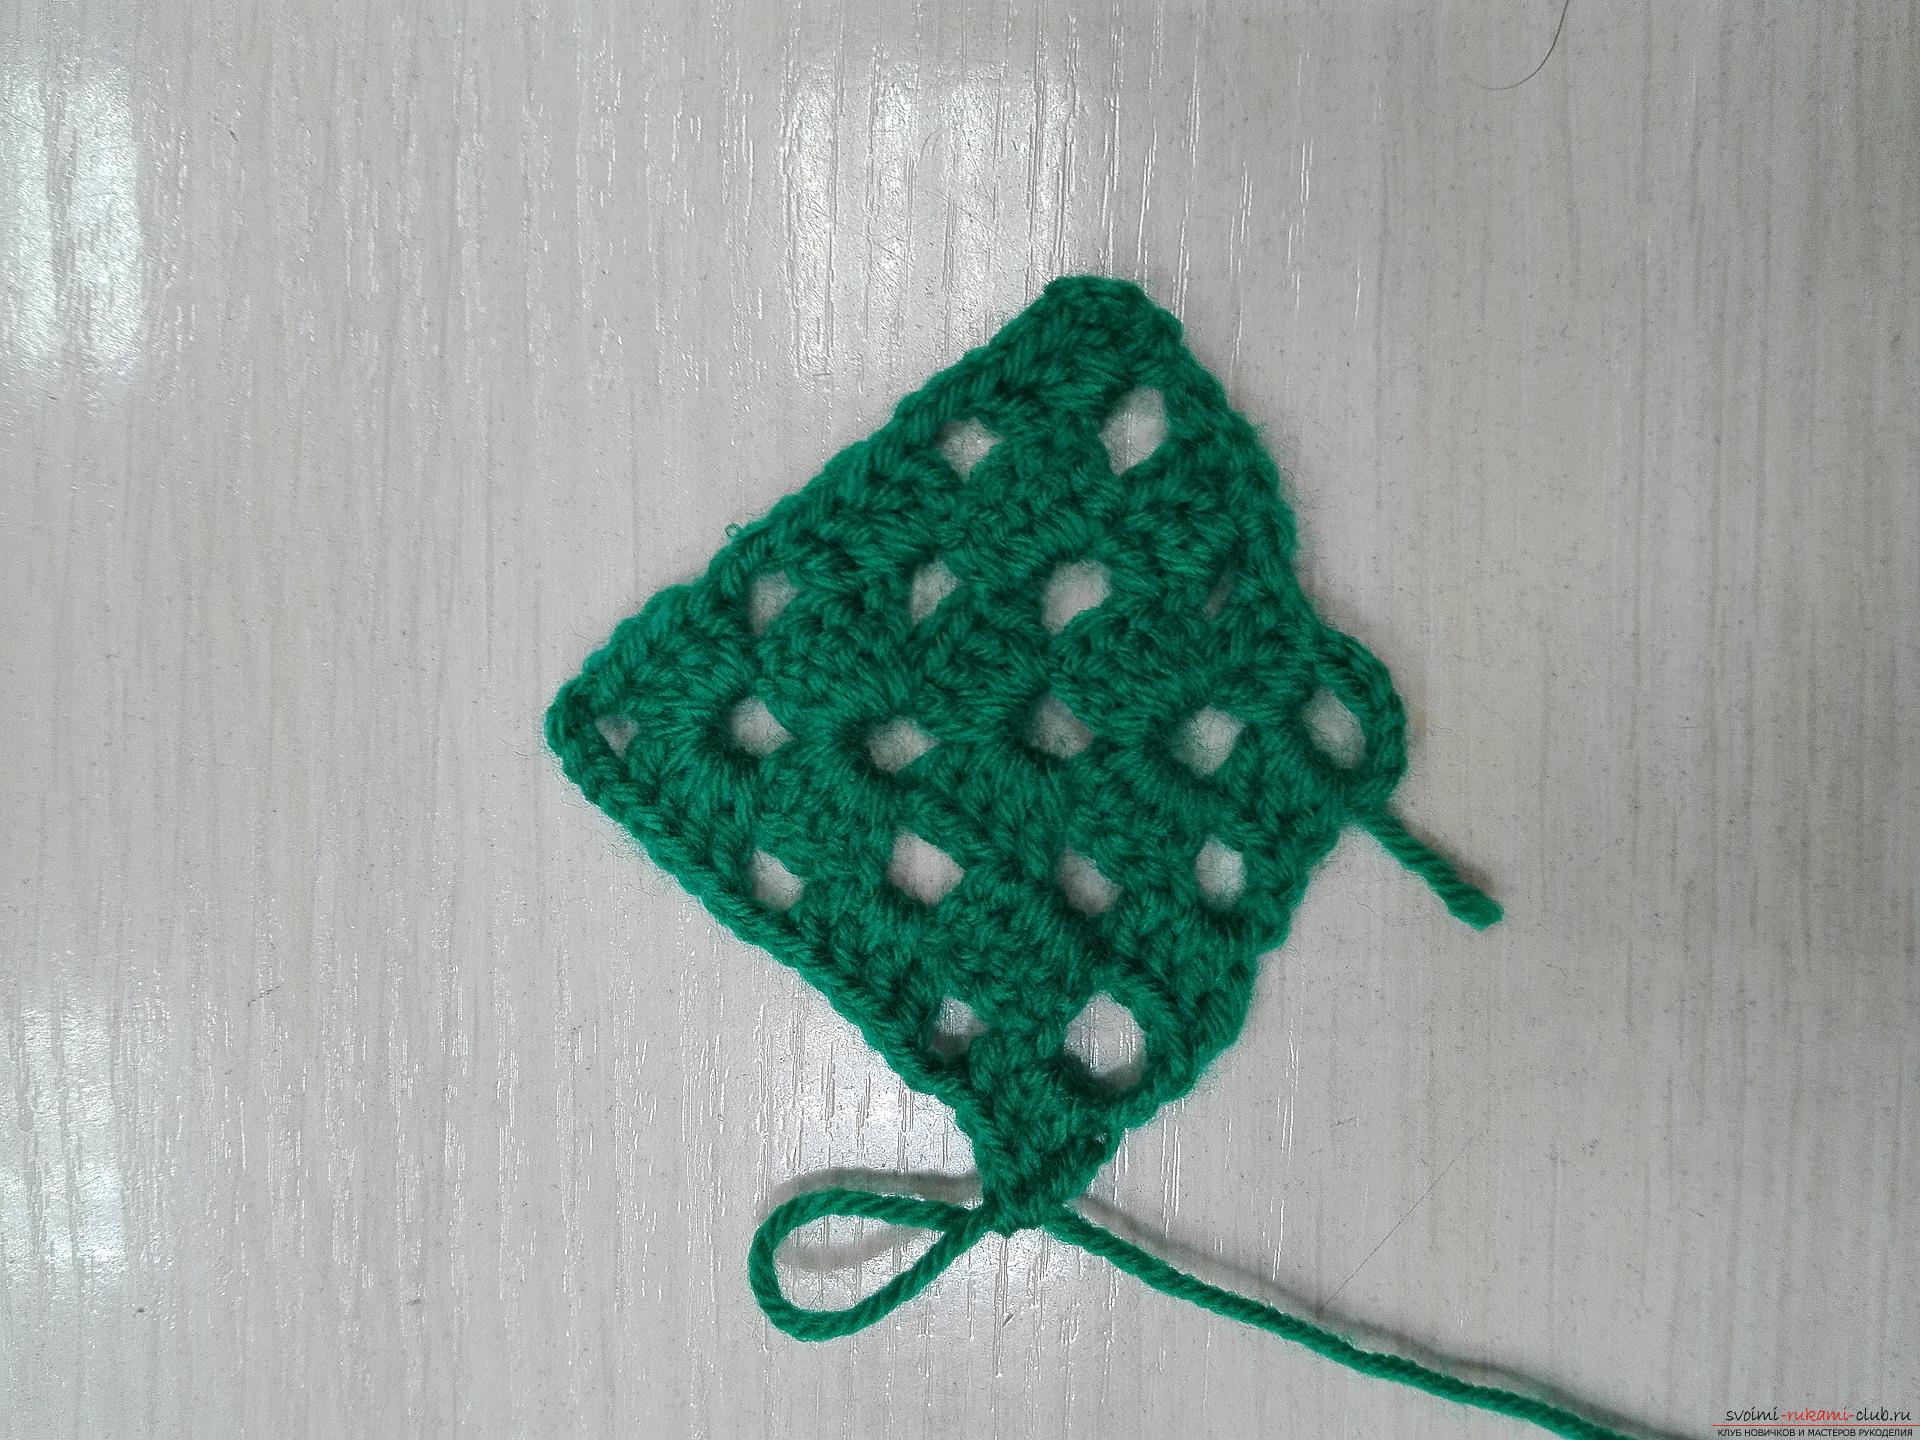 This master class on knitting is designed by the lover - he will teach how to tie the heart crochet. Picture №10